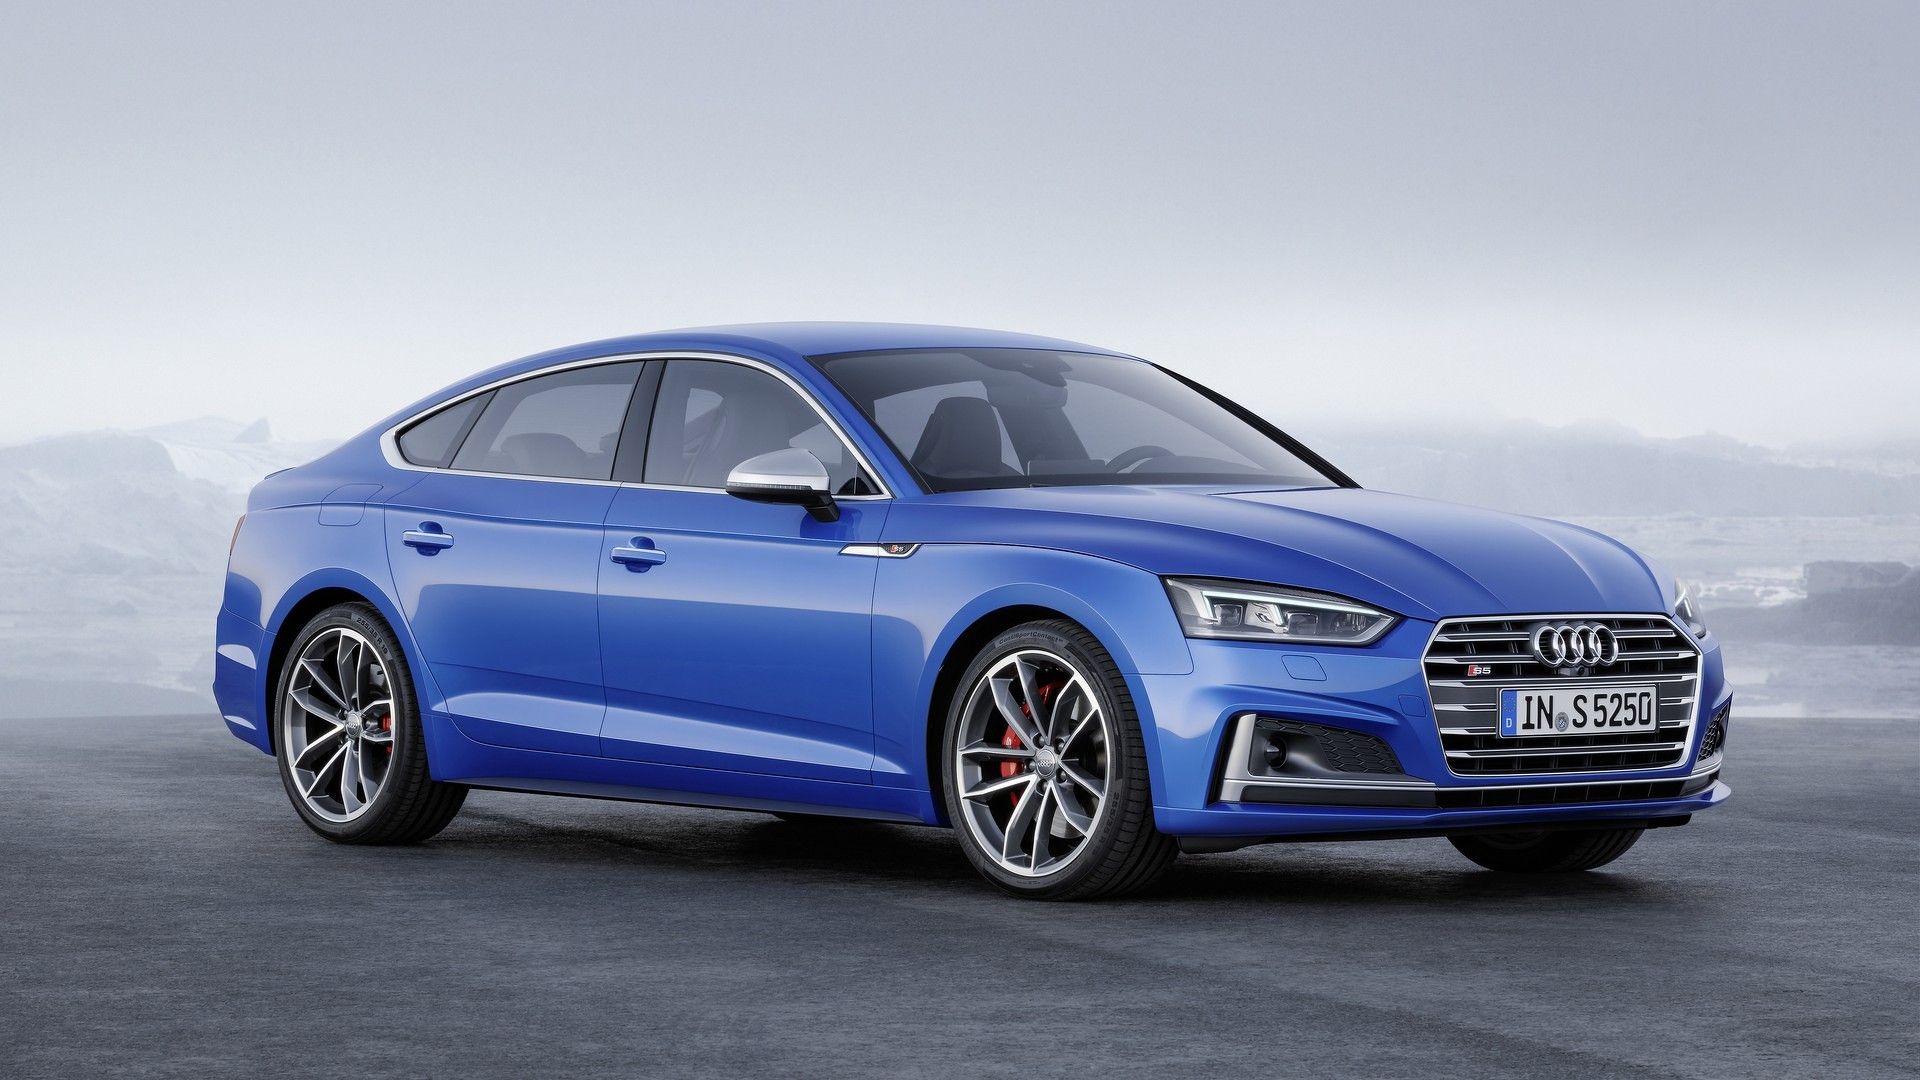 Audi A5 and S5 Sportback revealed ahead of Paris debut